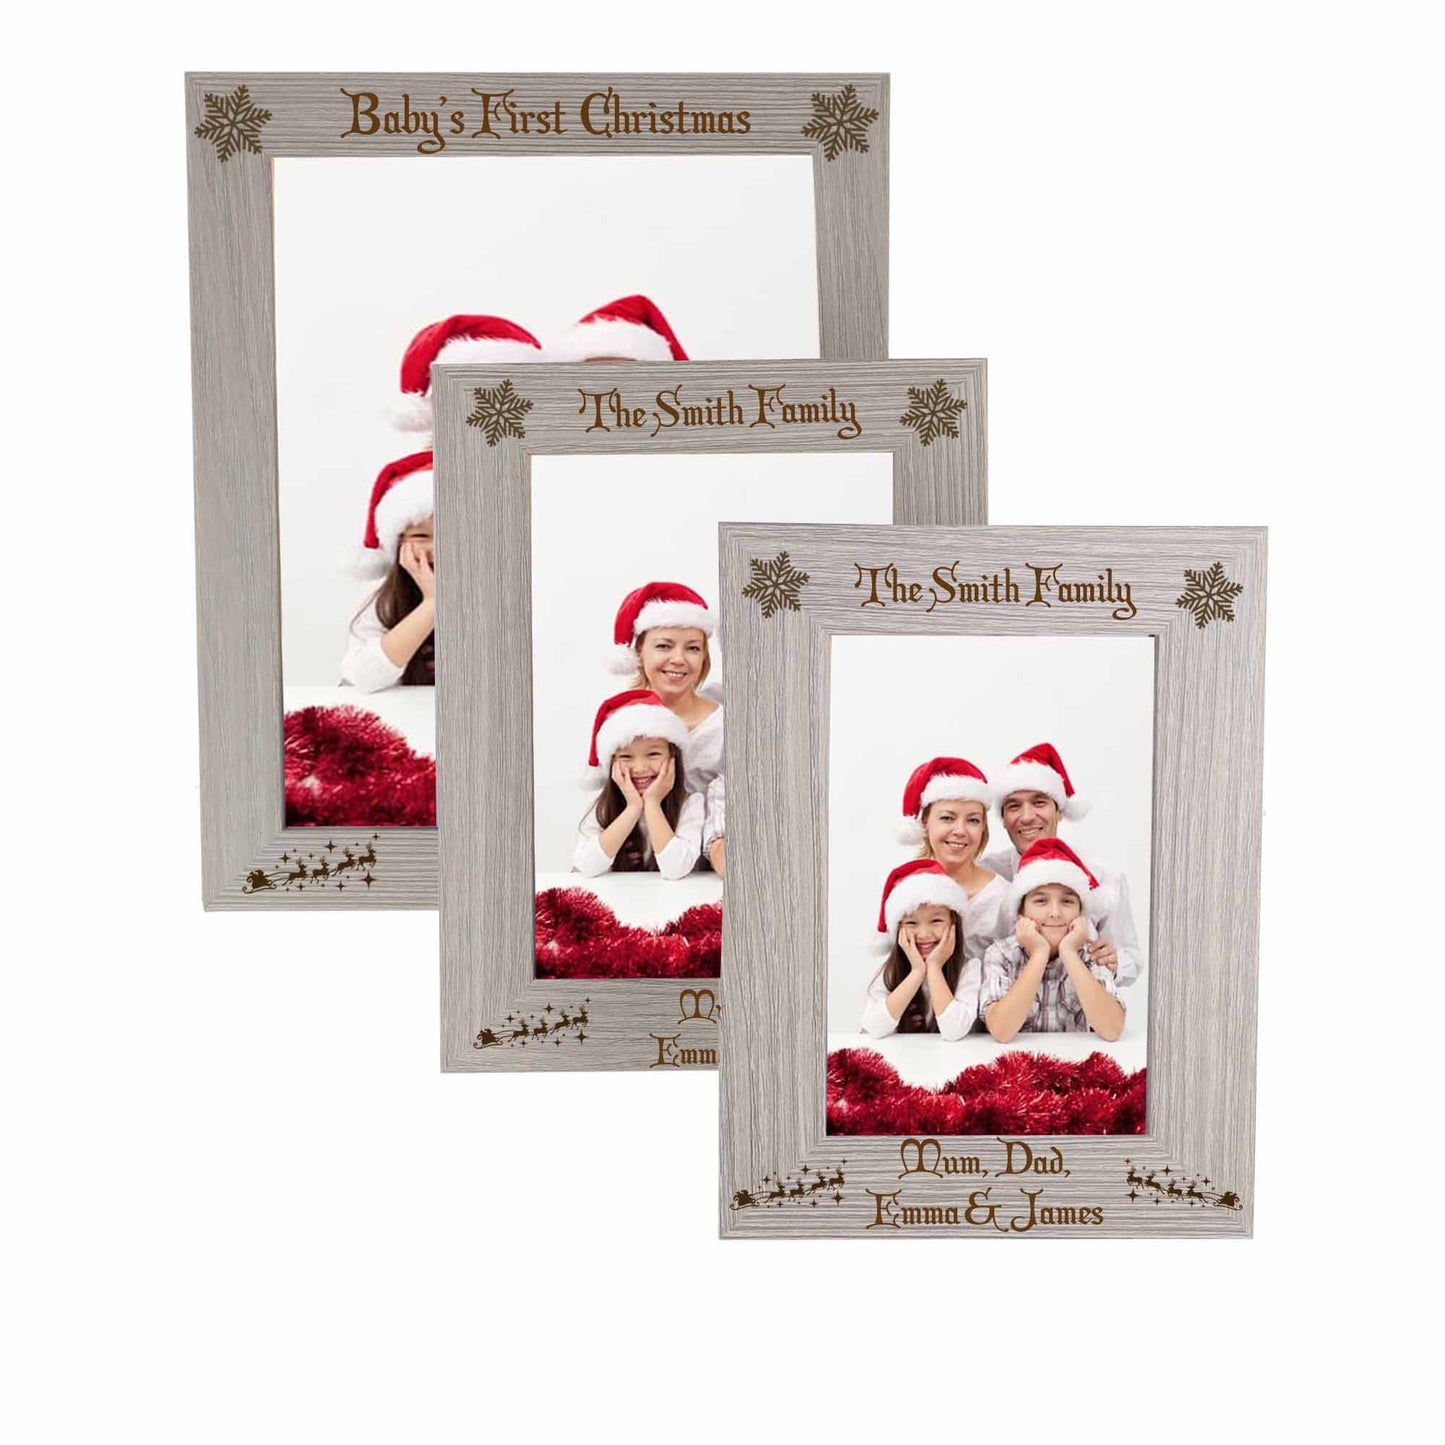 Personalised Engraved Family Christmas Photo Frame  - Always Looking Good -   